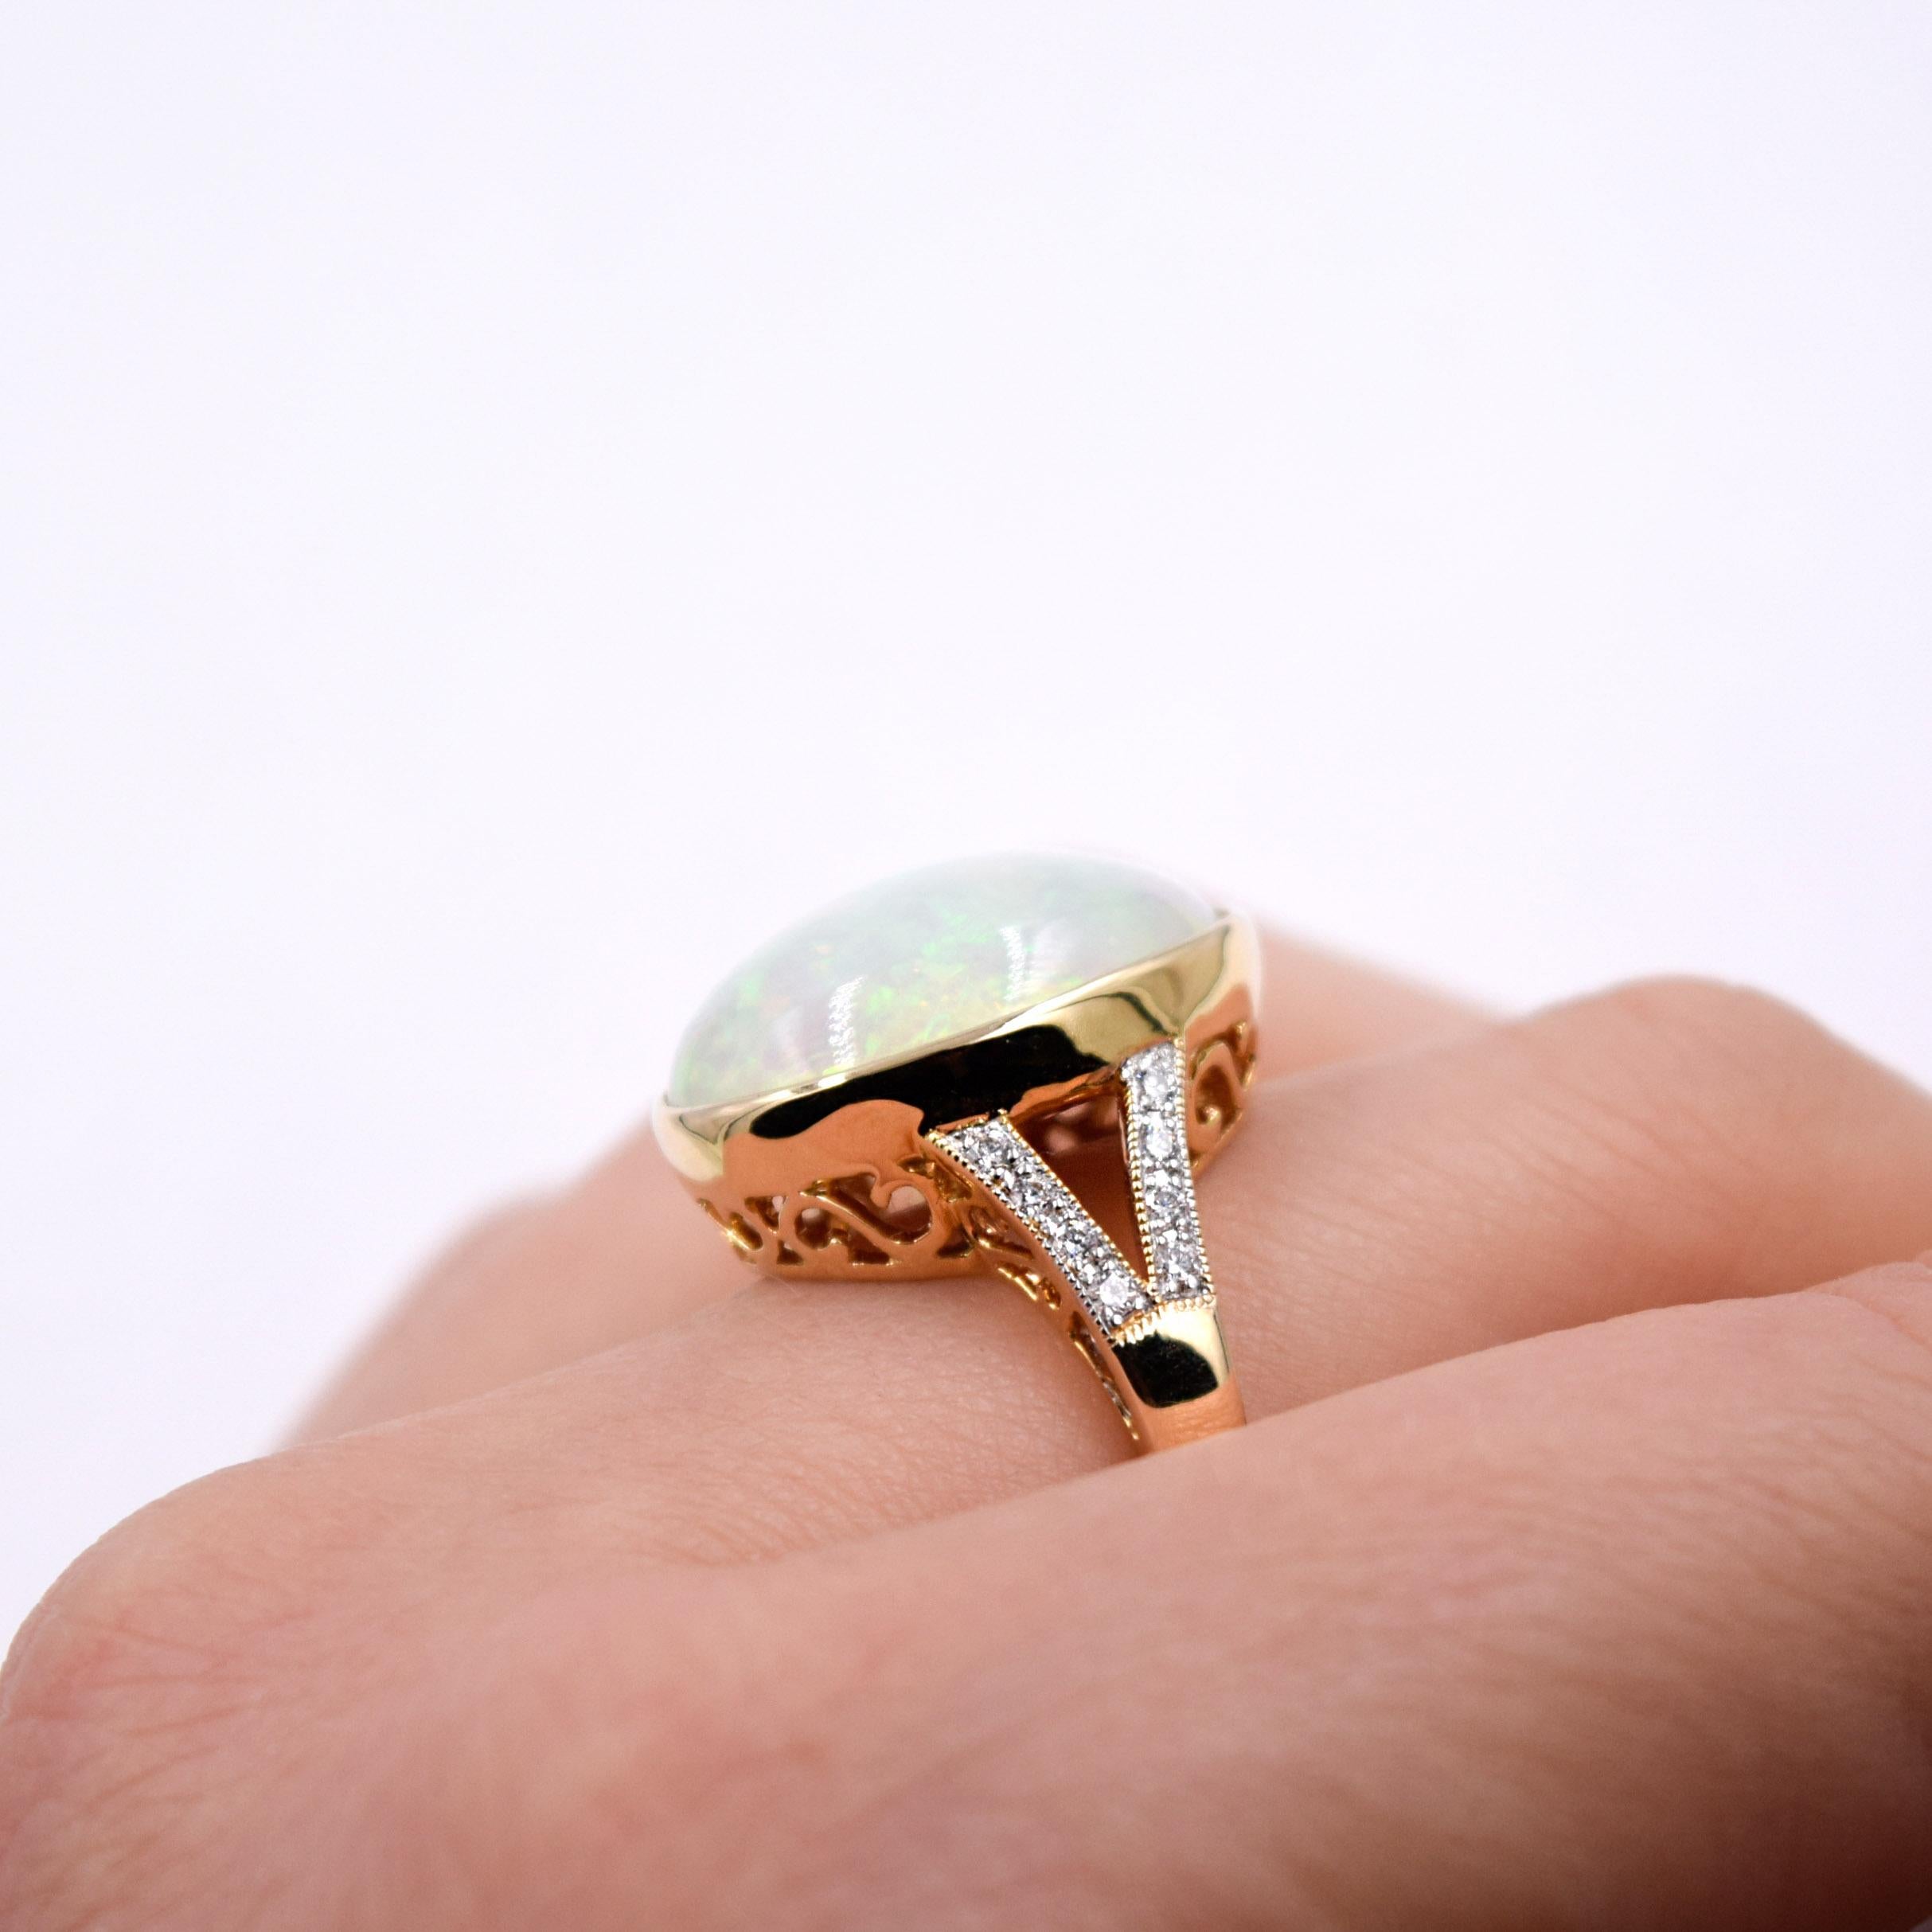 Women's 8.09 Carat Ethiopian Opal and White Diamond Statement Ring in 14 Karat Gold For Sale